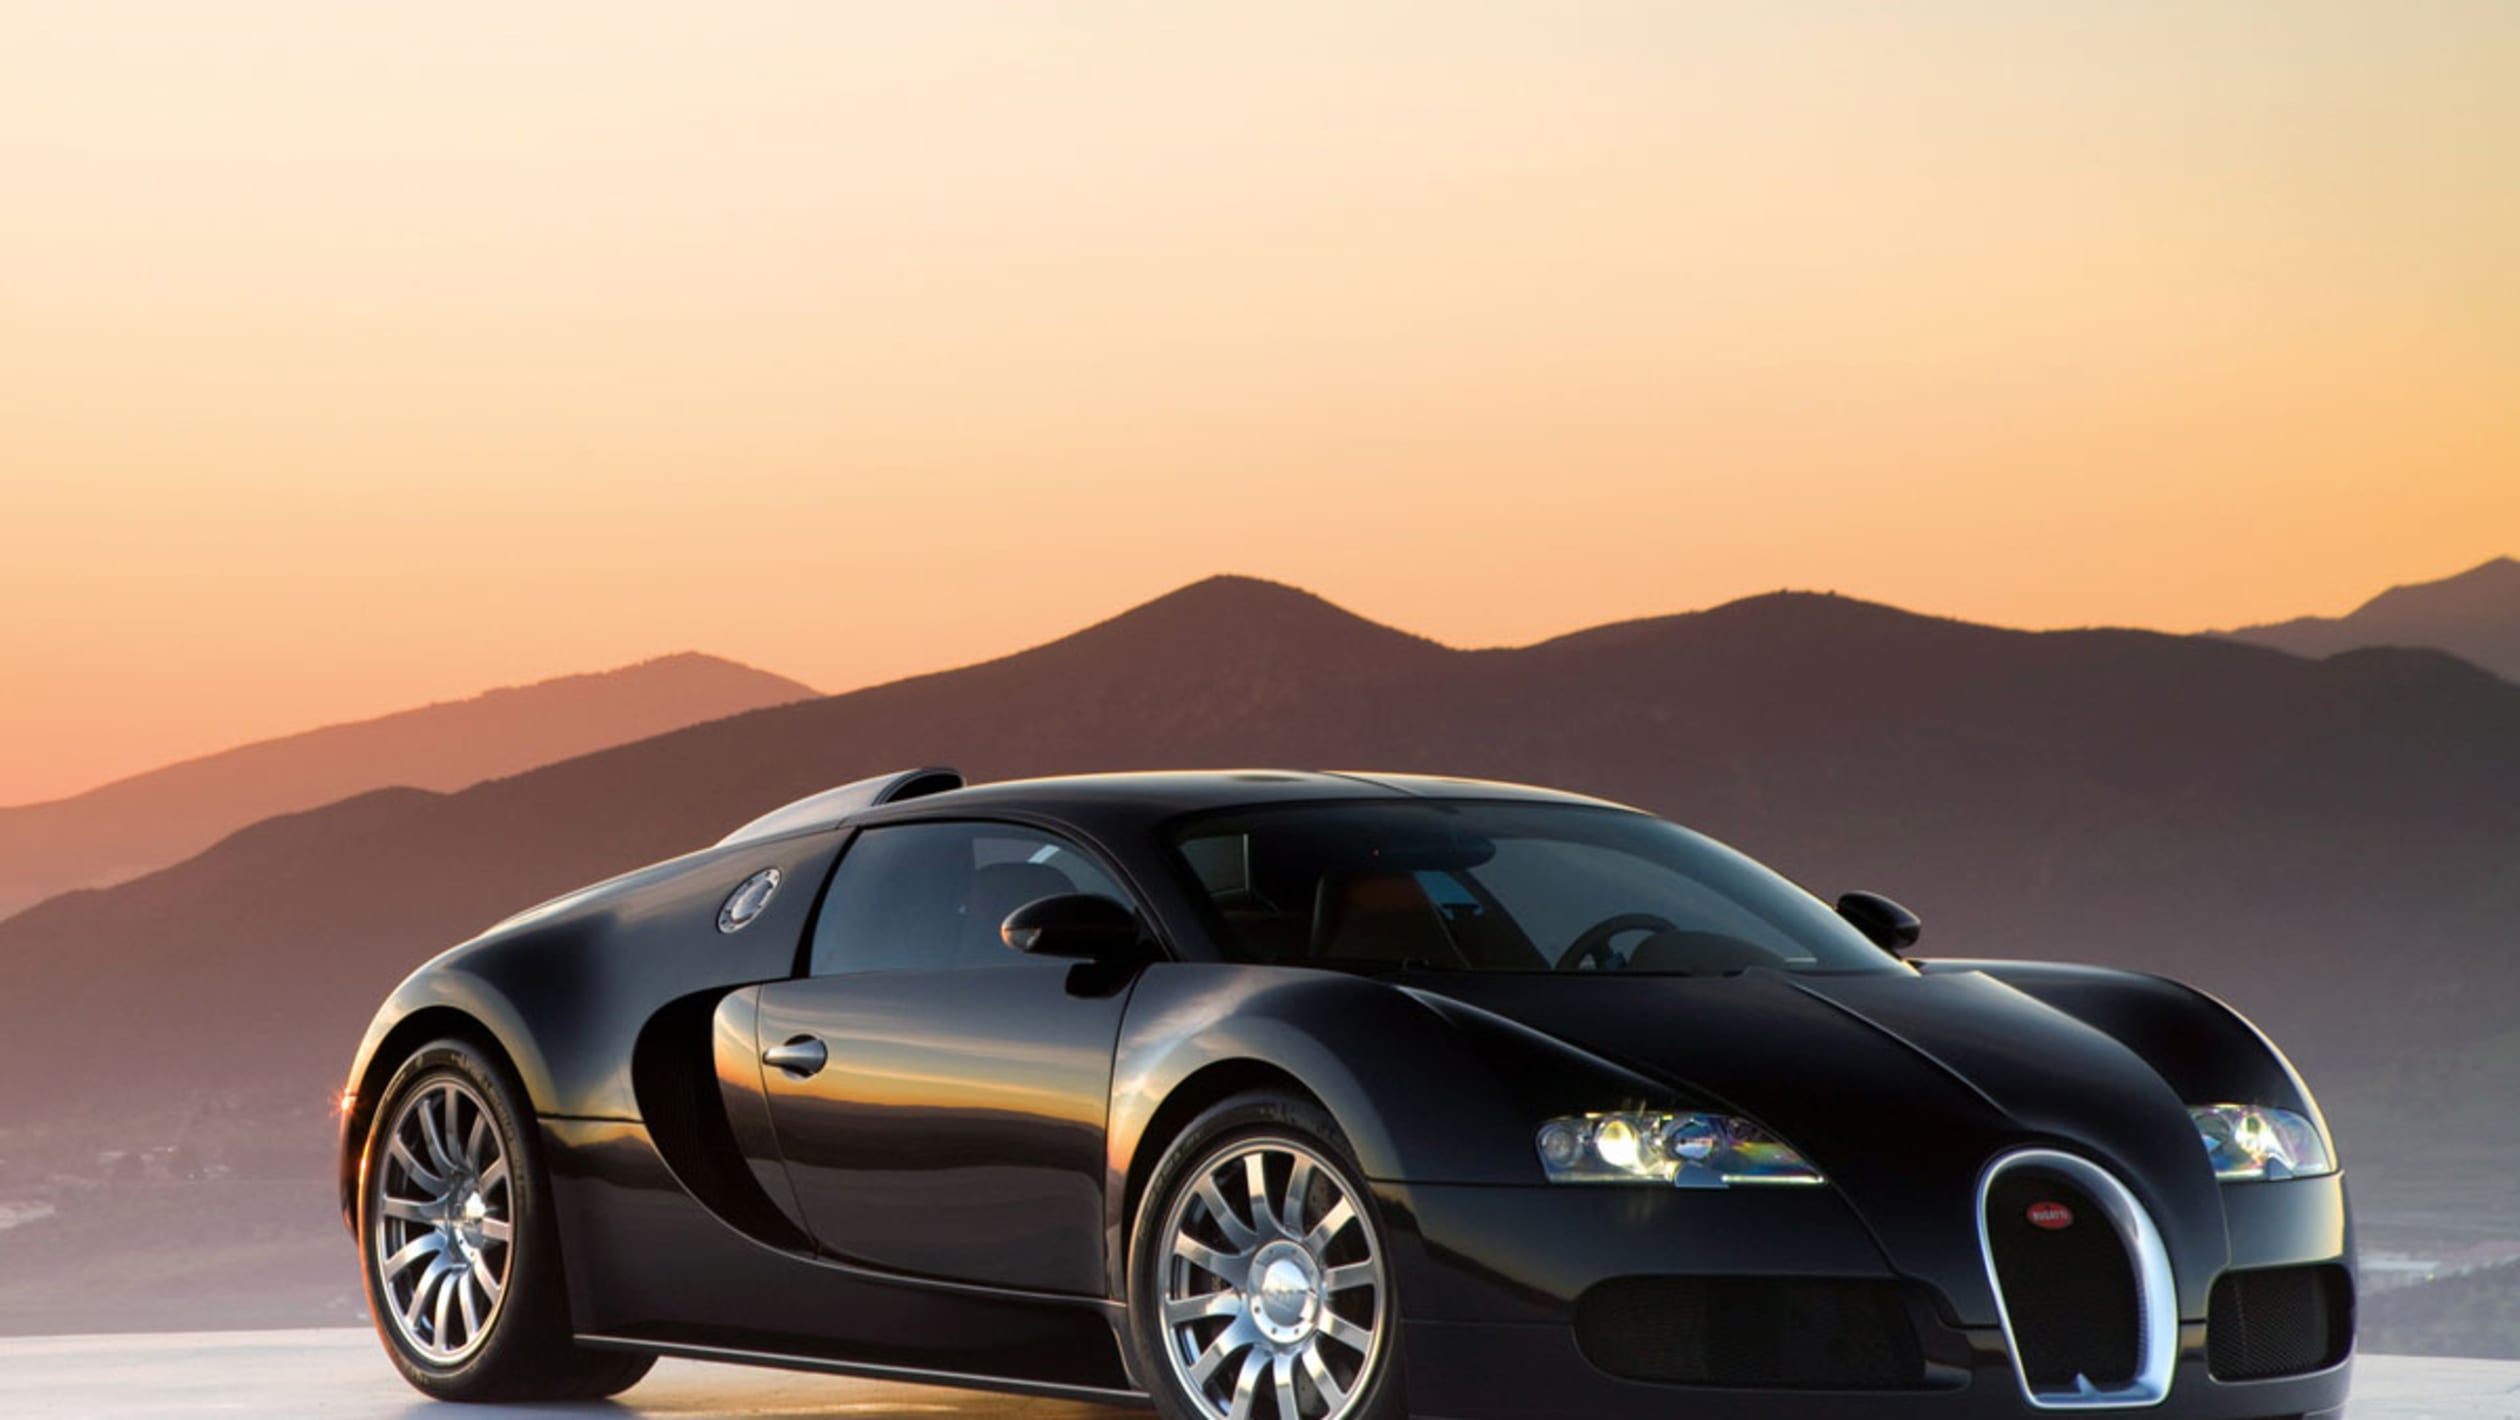 Fastest cars in the world gallery - Pictures